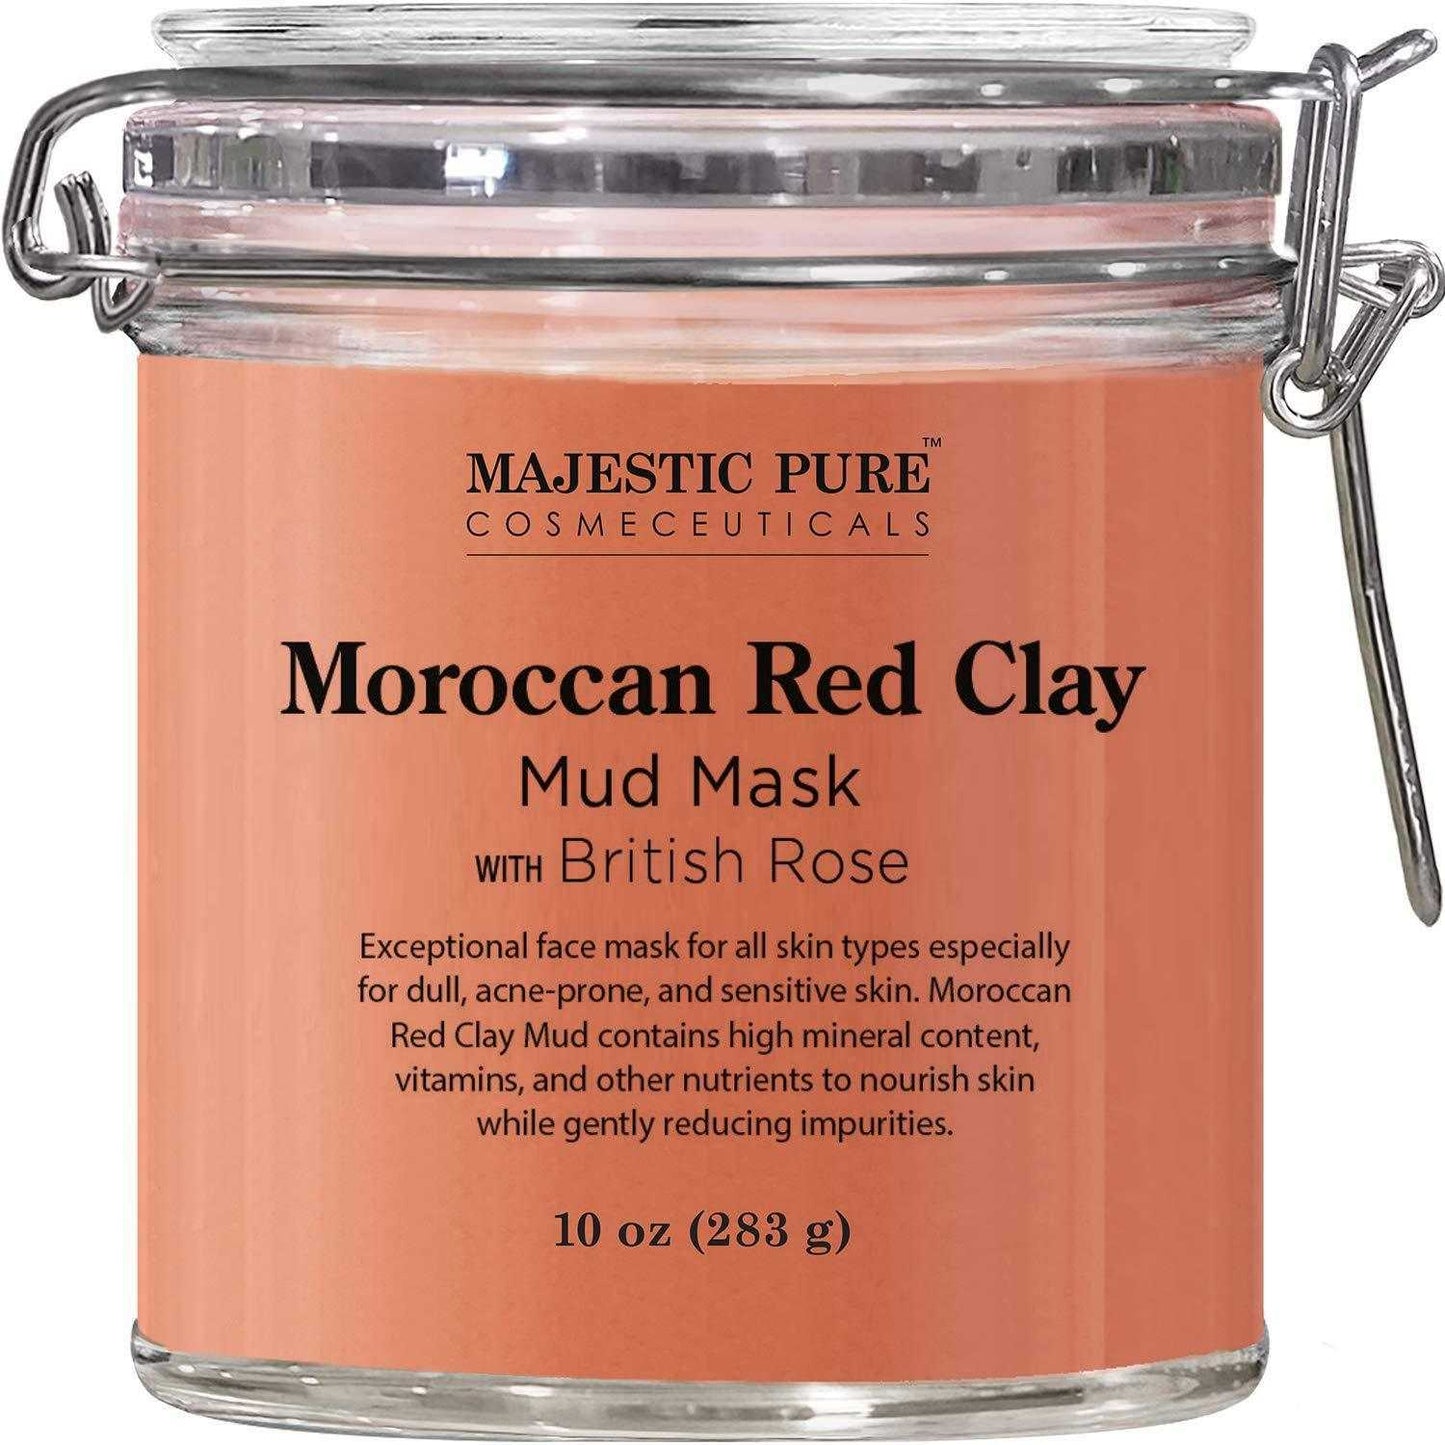 Majestic Pure - Moroccan Red Clay Mud Mask "Moroccan Red Clay Mud Mask" - 283g - Majestic Pure - Ethni Beauty Market